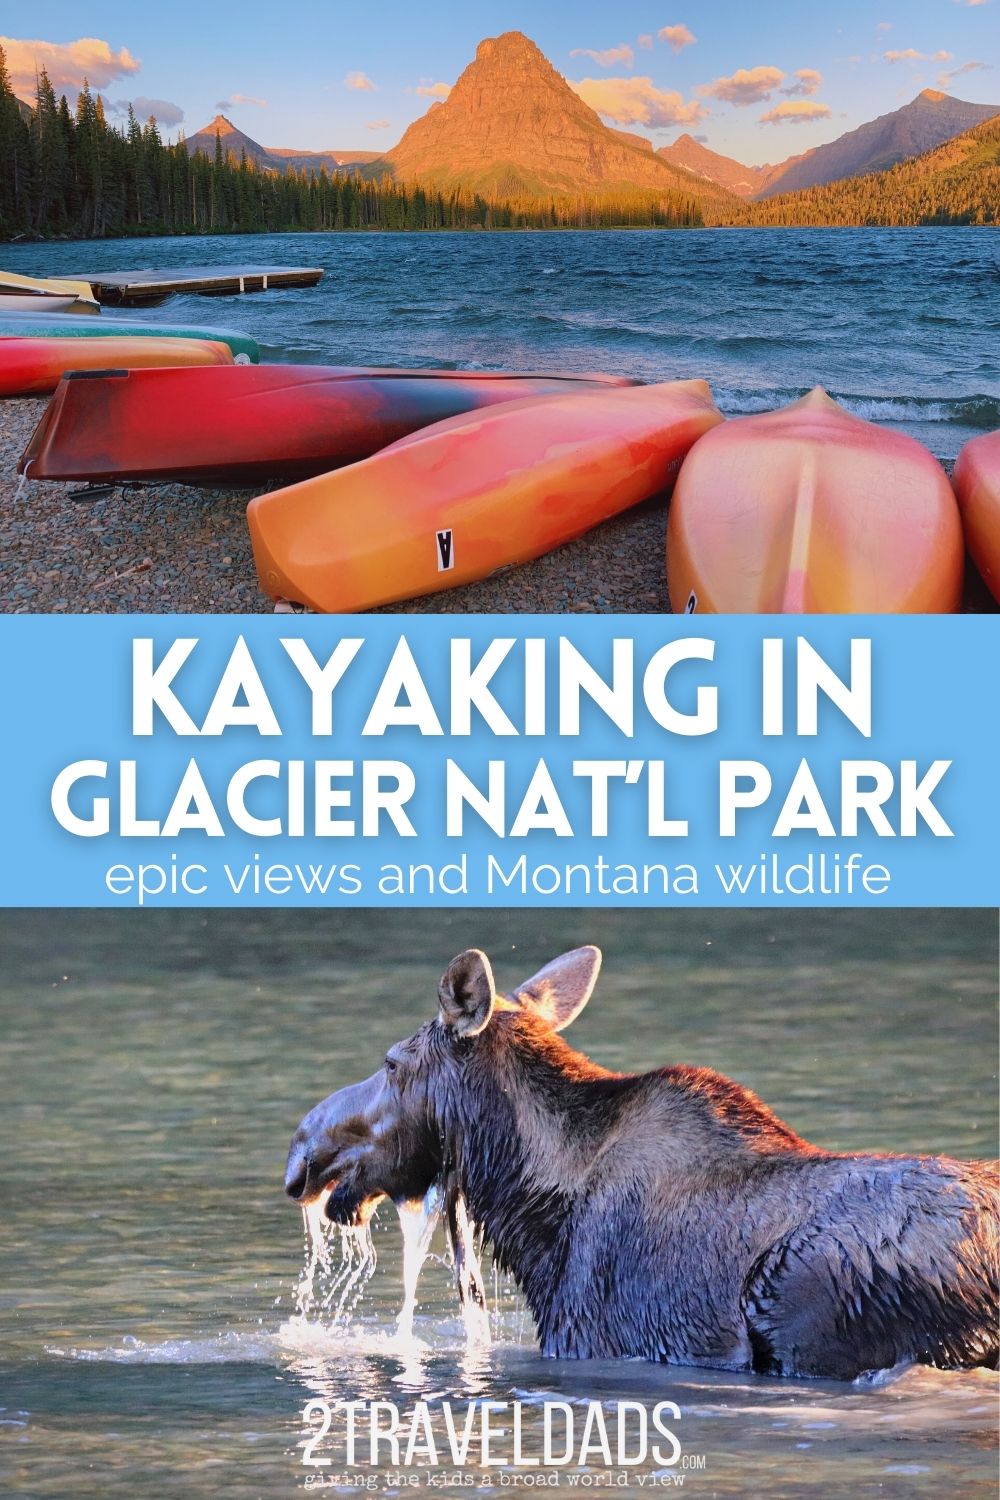 Kayaking in Glacier National Park is a completely different way to experience this amazing Montana destination. We've picked the best places to kayak and also rental options for exploring Glacier NP on the water.